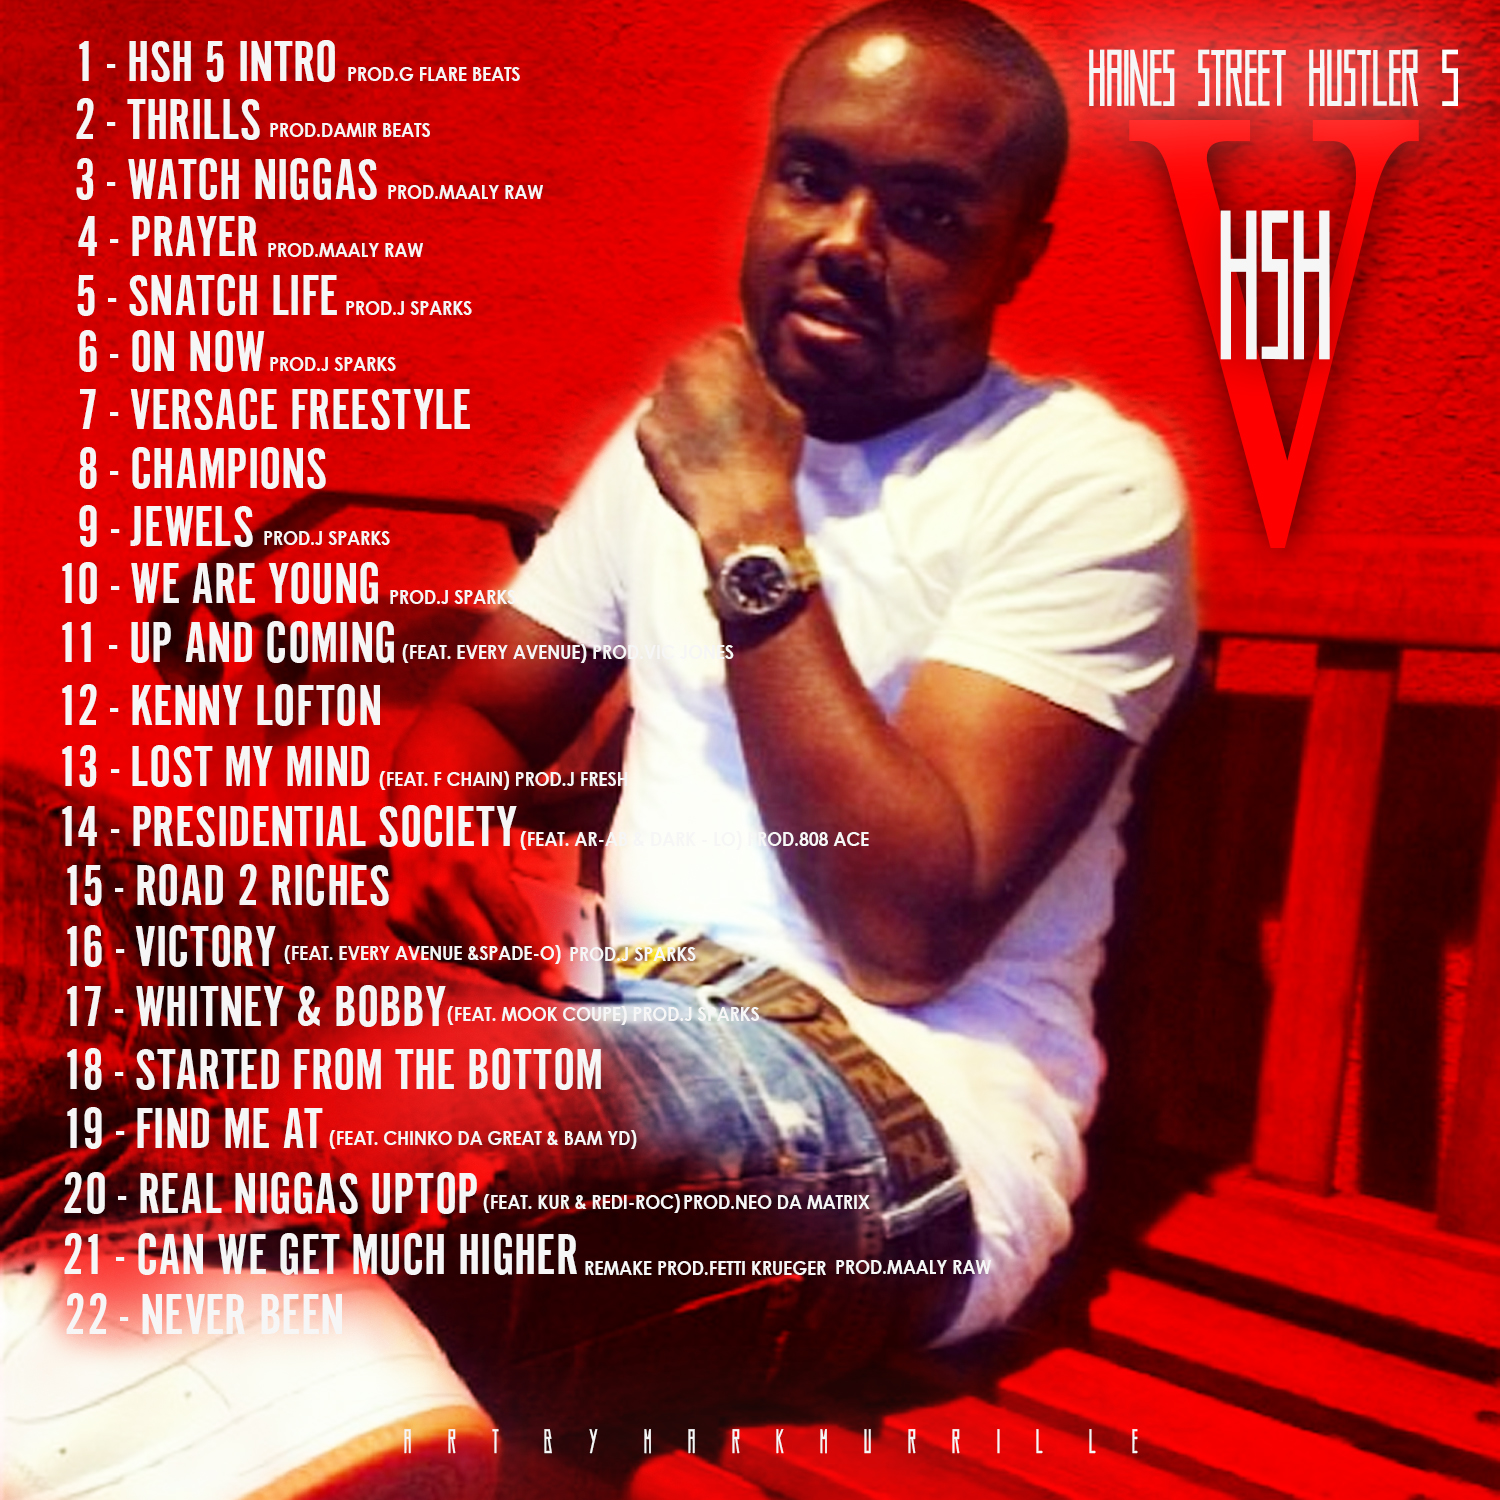 quilly-millz-hsh-v-mixtape-HHS1987-2013-TRACKLIST Quilly Millz - HSH V (Mixtape)  